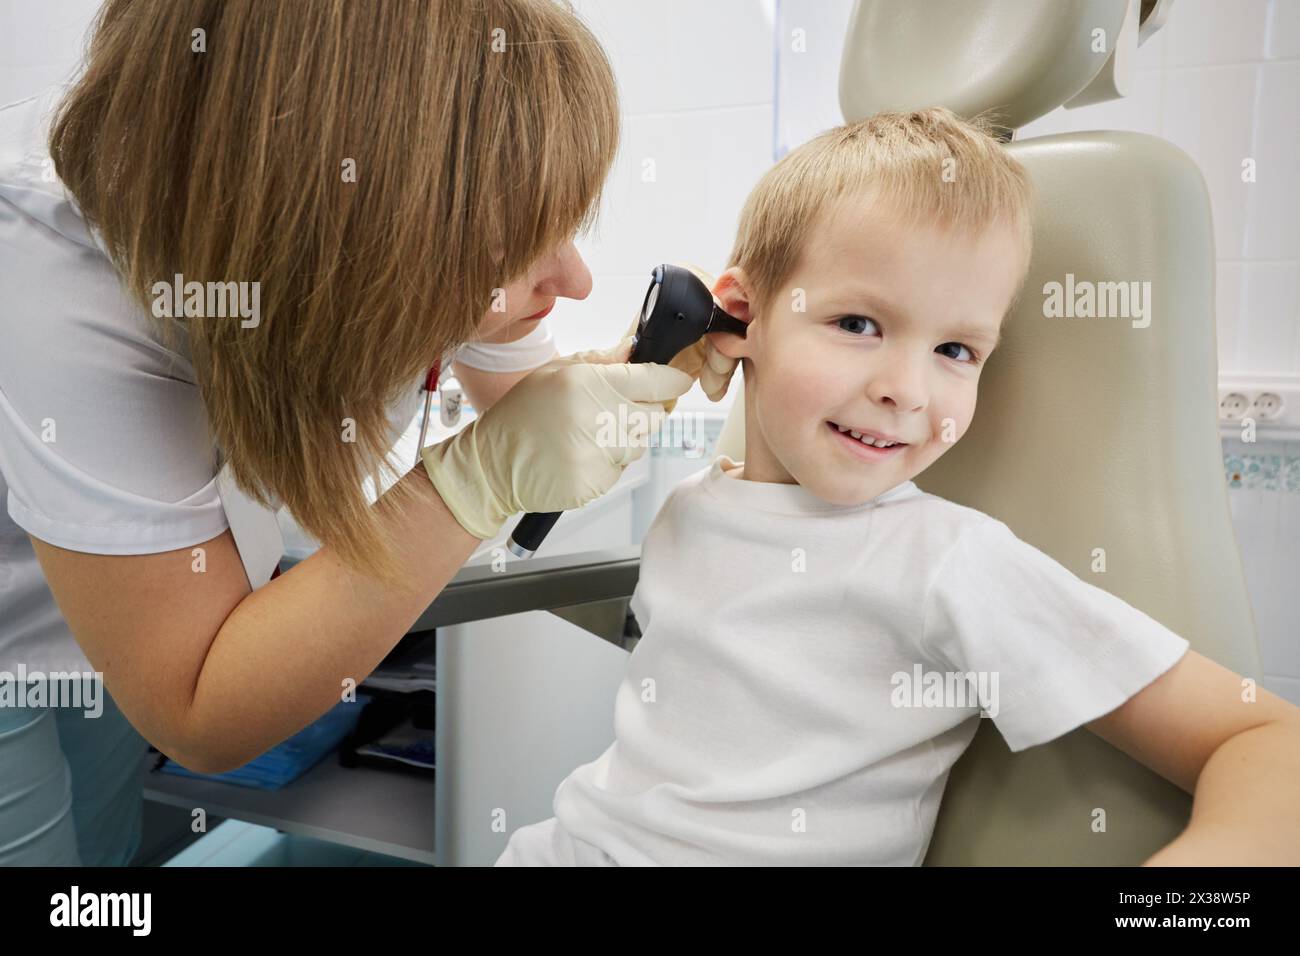 Female doctor examines ear of smiling boy sitting in medical armchair. Stock Photo